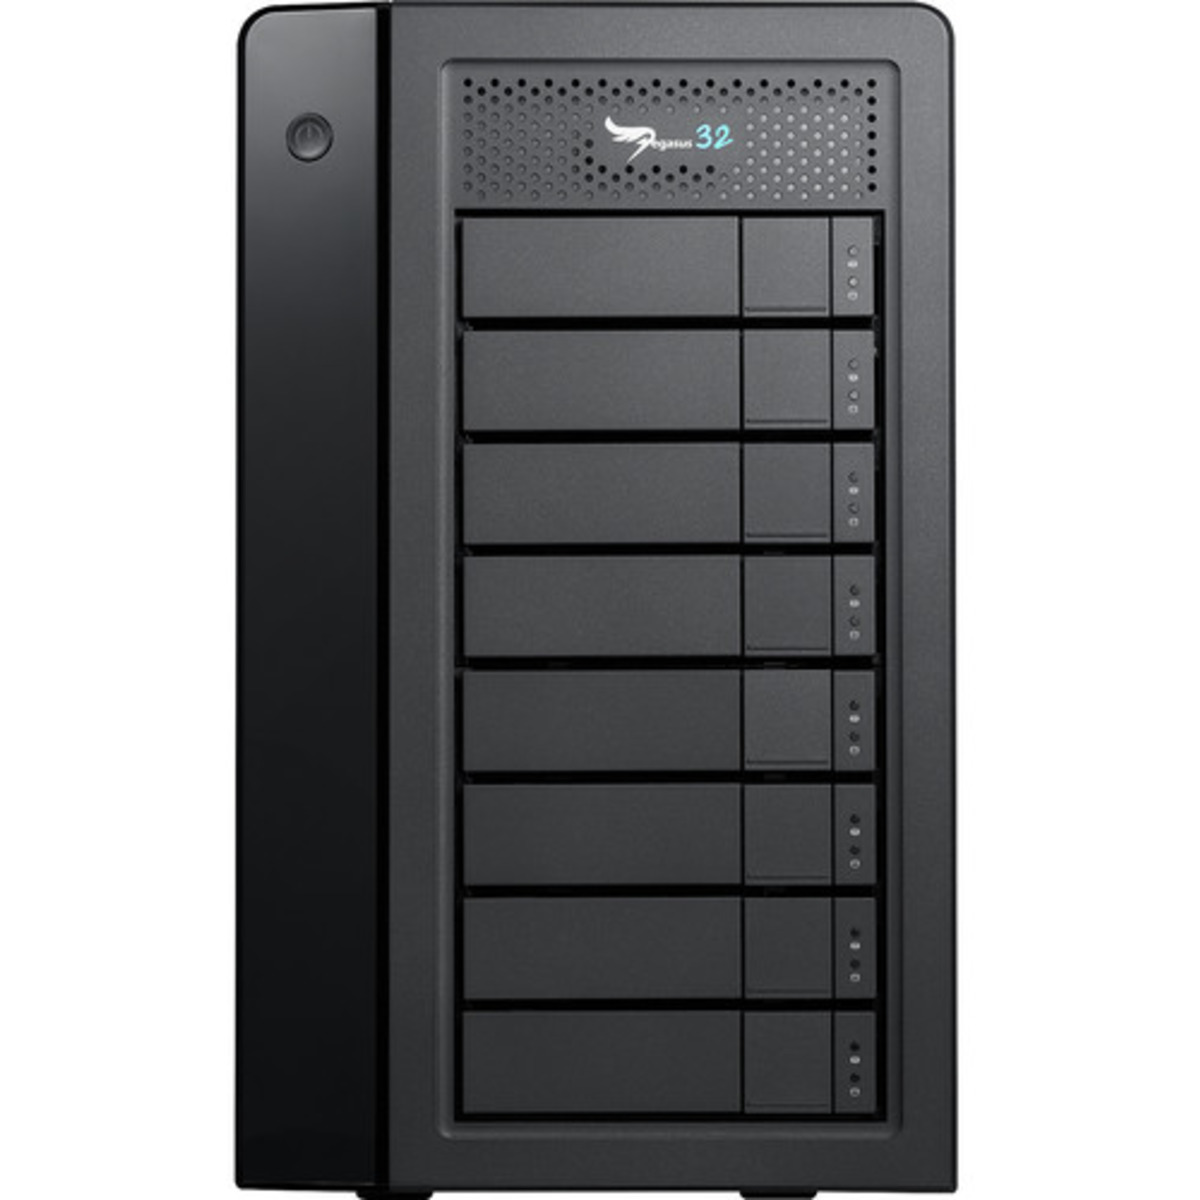 Promise Technology Pegasus32 R8 Thunderbolt 3 96tb 8-Bay Desktop Multimedia / Power User / Business DAS - Direct Attached Storage Device 4x24tb Western Digital Ultrastar HC580 WUH722424ALE6L4 3.5 7200rpm SATA 6Gb/s HDD ENTERPRISE Class Drives Installed - Burn-In Tested - ON SALE Pegasus32 R8 Thunderbolt 3